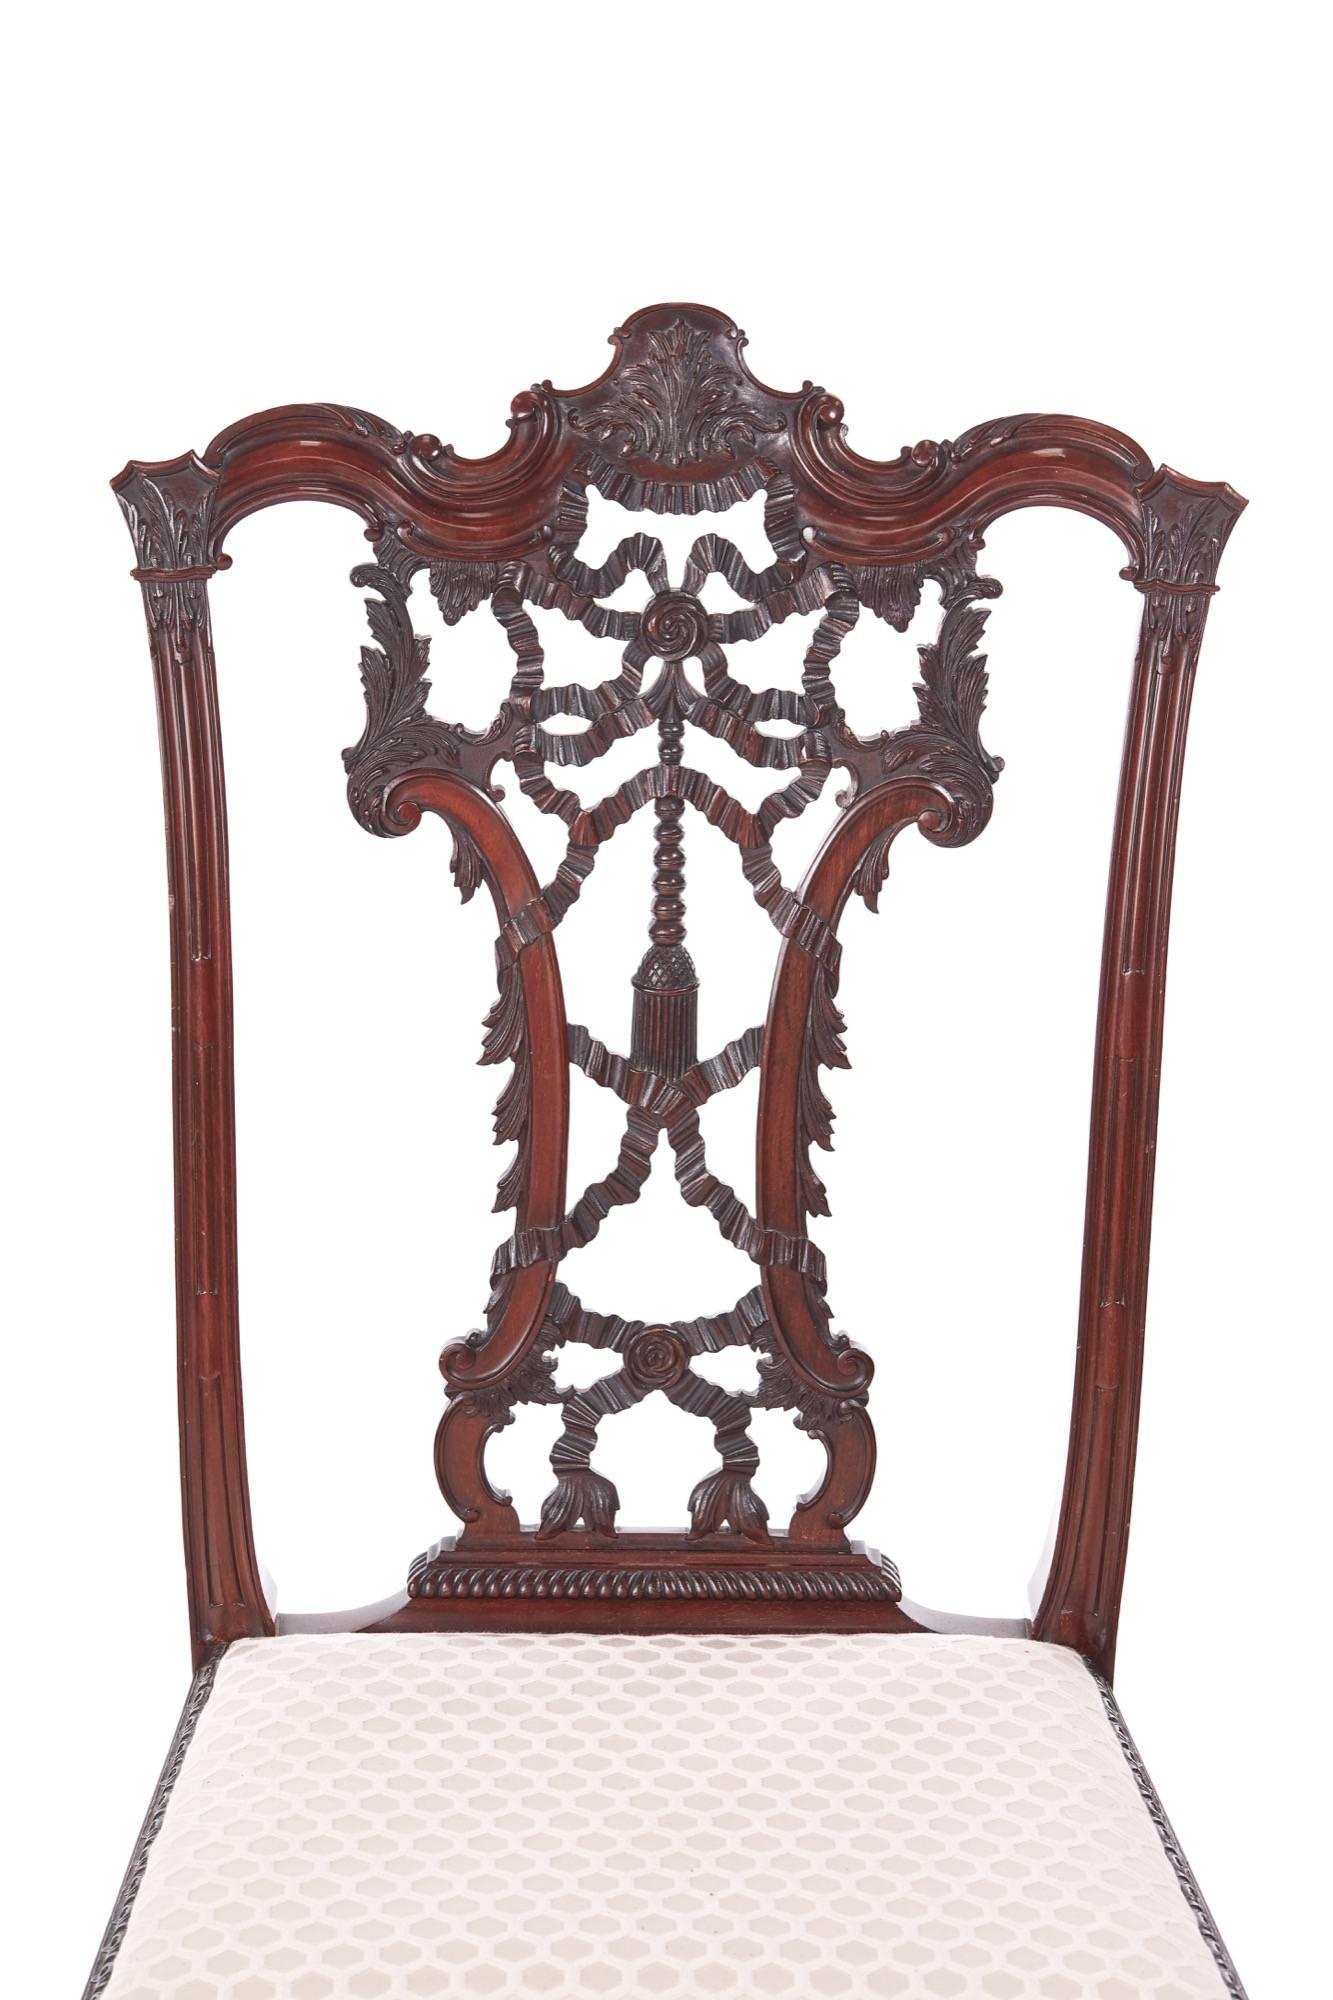 European Outstanding Antique Carved Mahogany Desk Chair For Sale